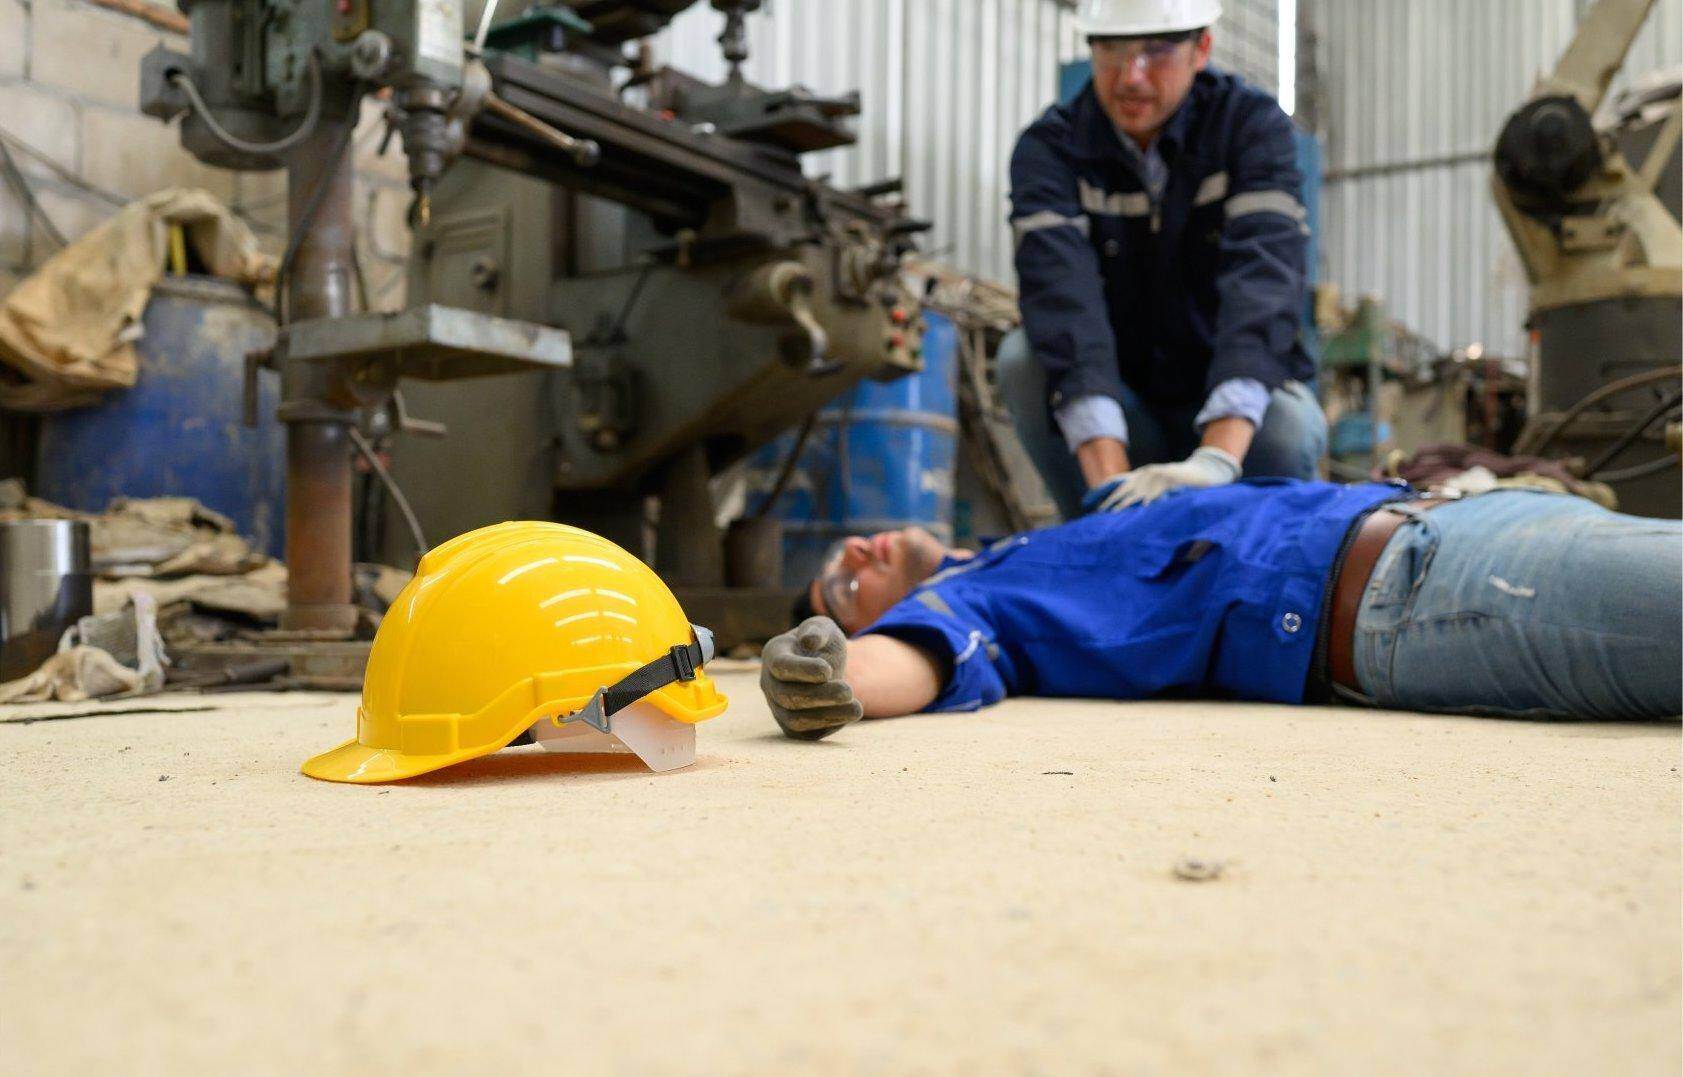 An unconscious man who has been injured on the job who will file for workers compensation in Sandy Springs, Georgia